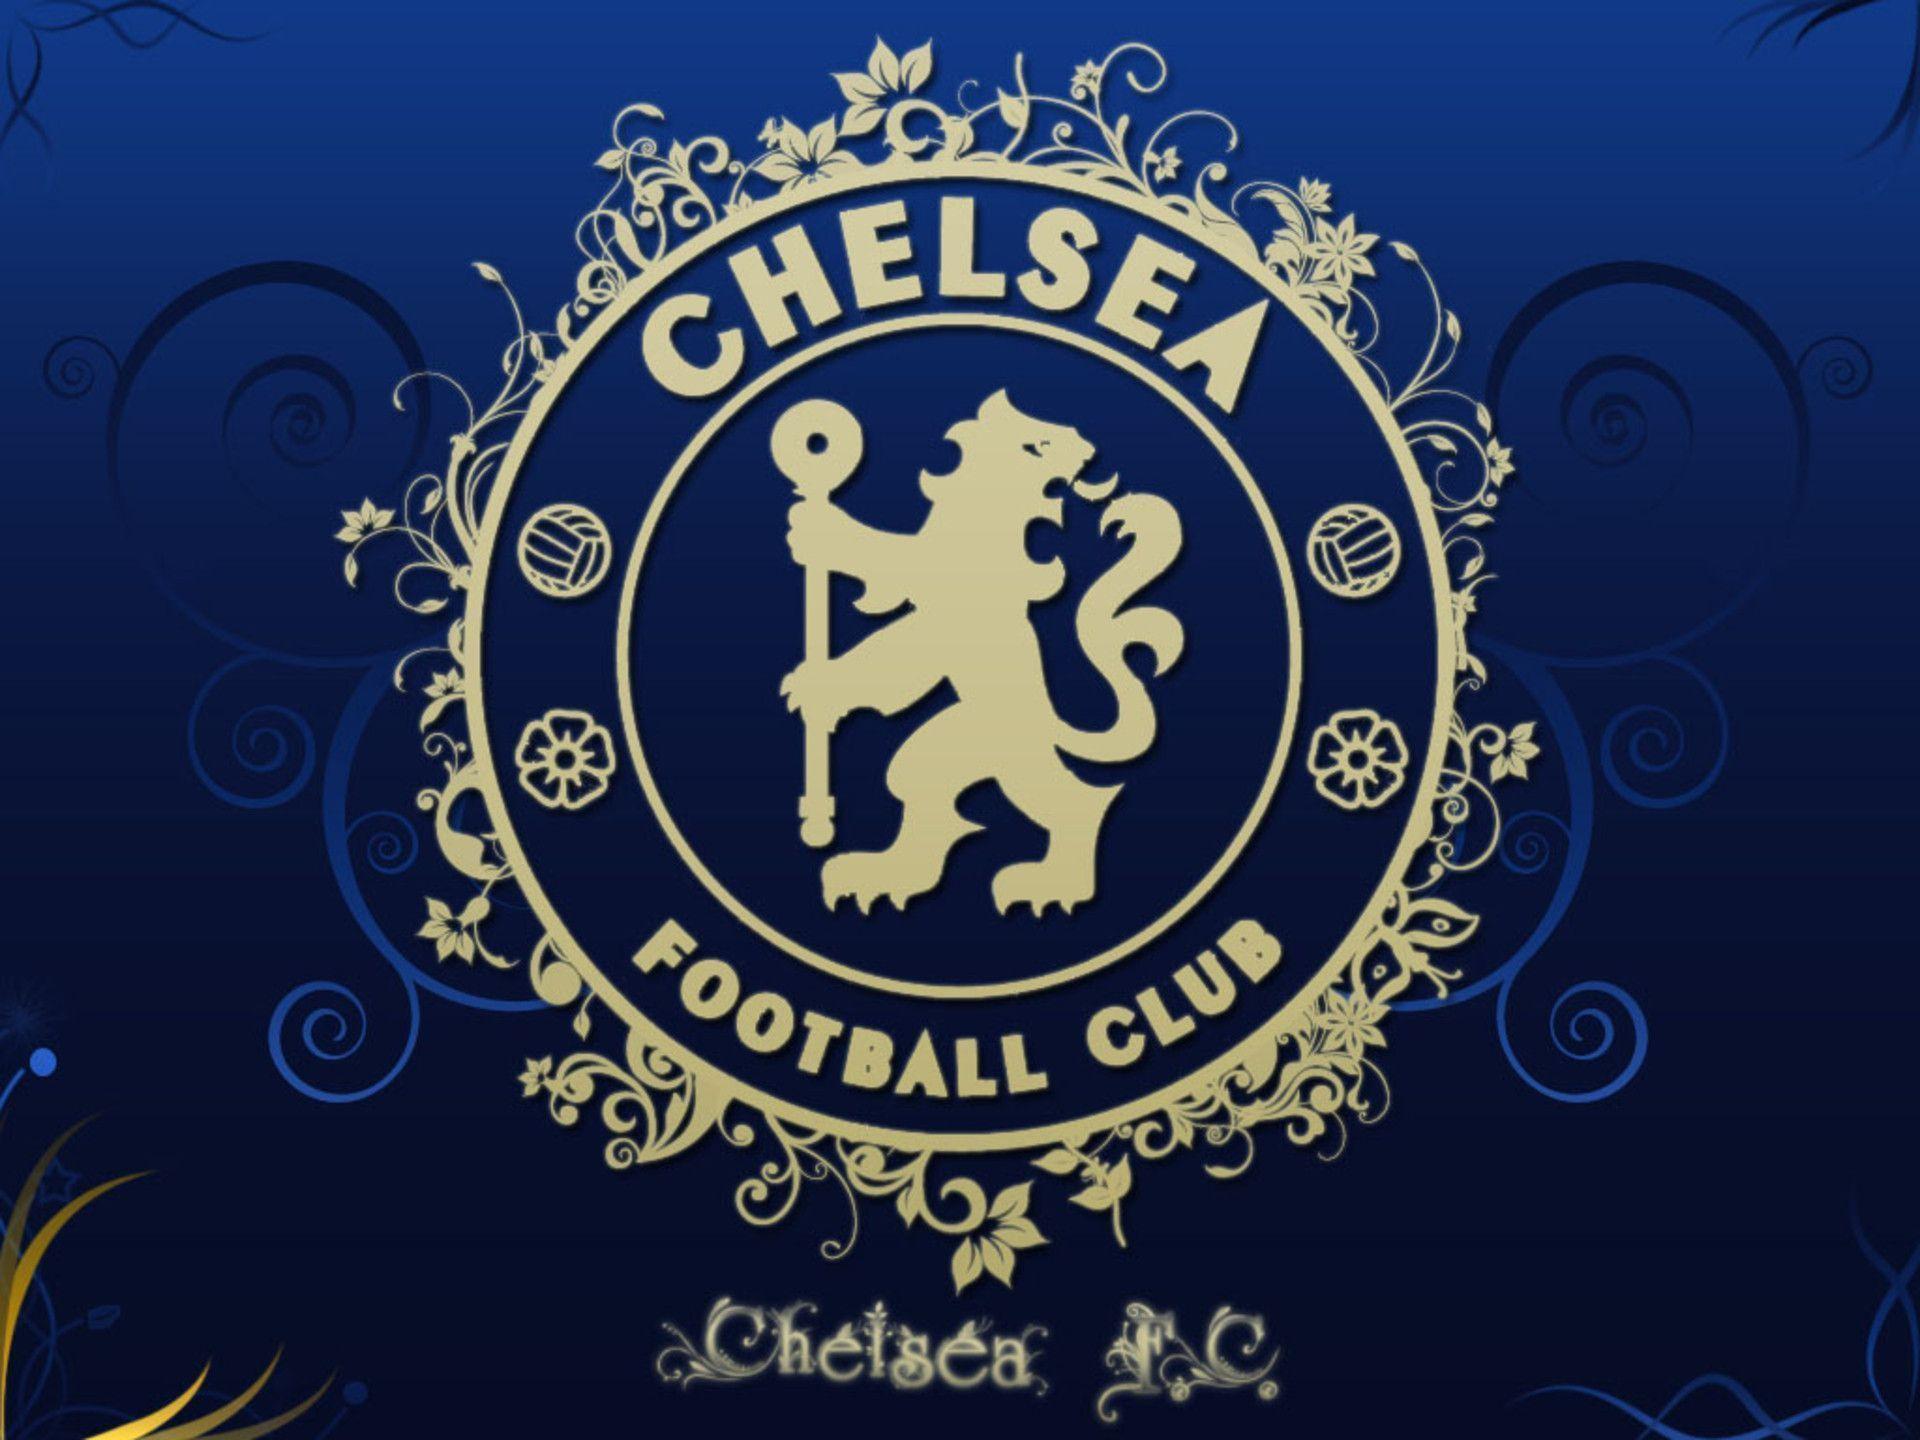 image about Chelsea Project Chelsea fc 576×1024